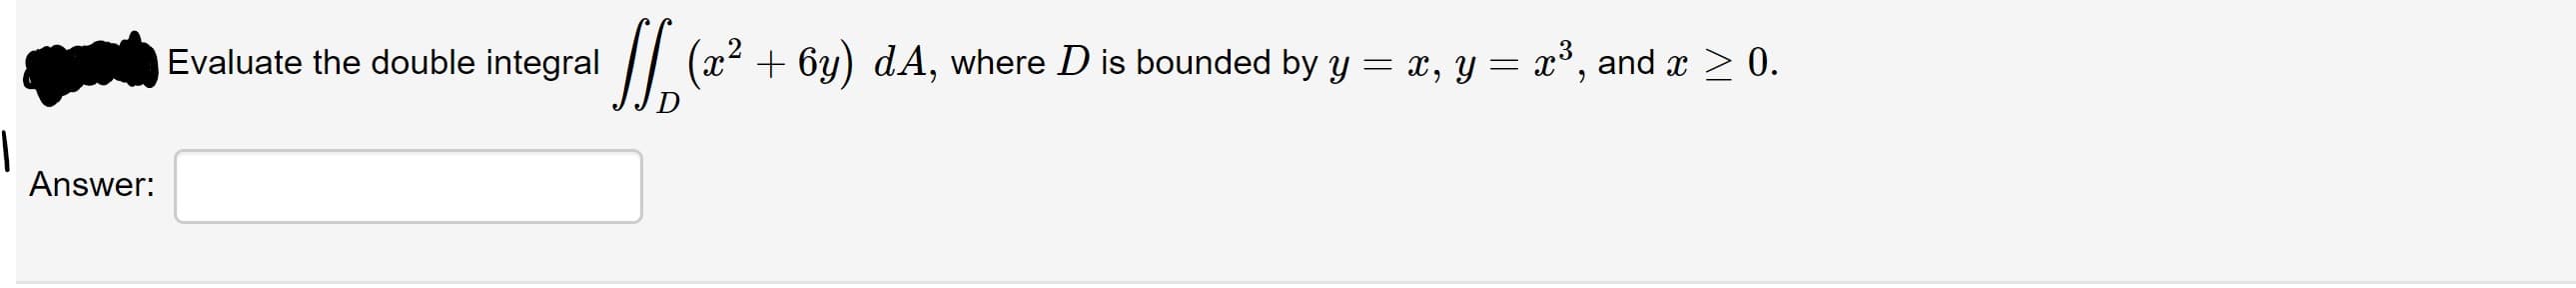 Evaluate the double integral
(x2 + 6y) dA, where D is bounded by y = x, y = x³, and x > 0.
Answer:
